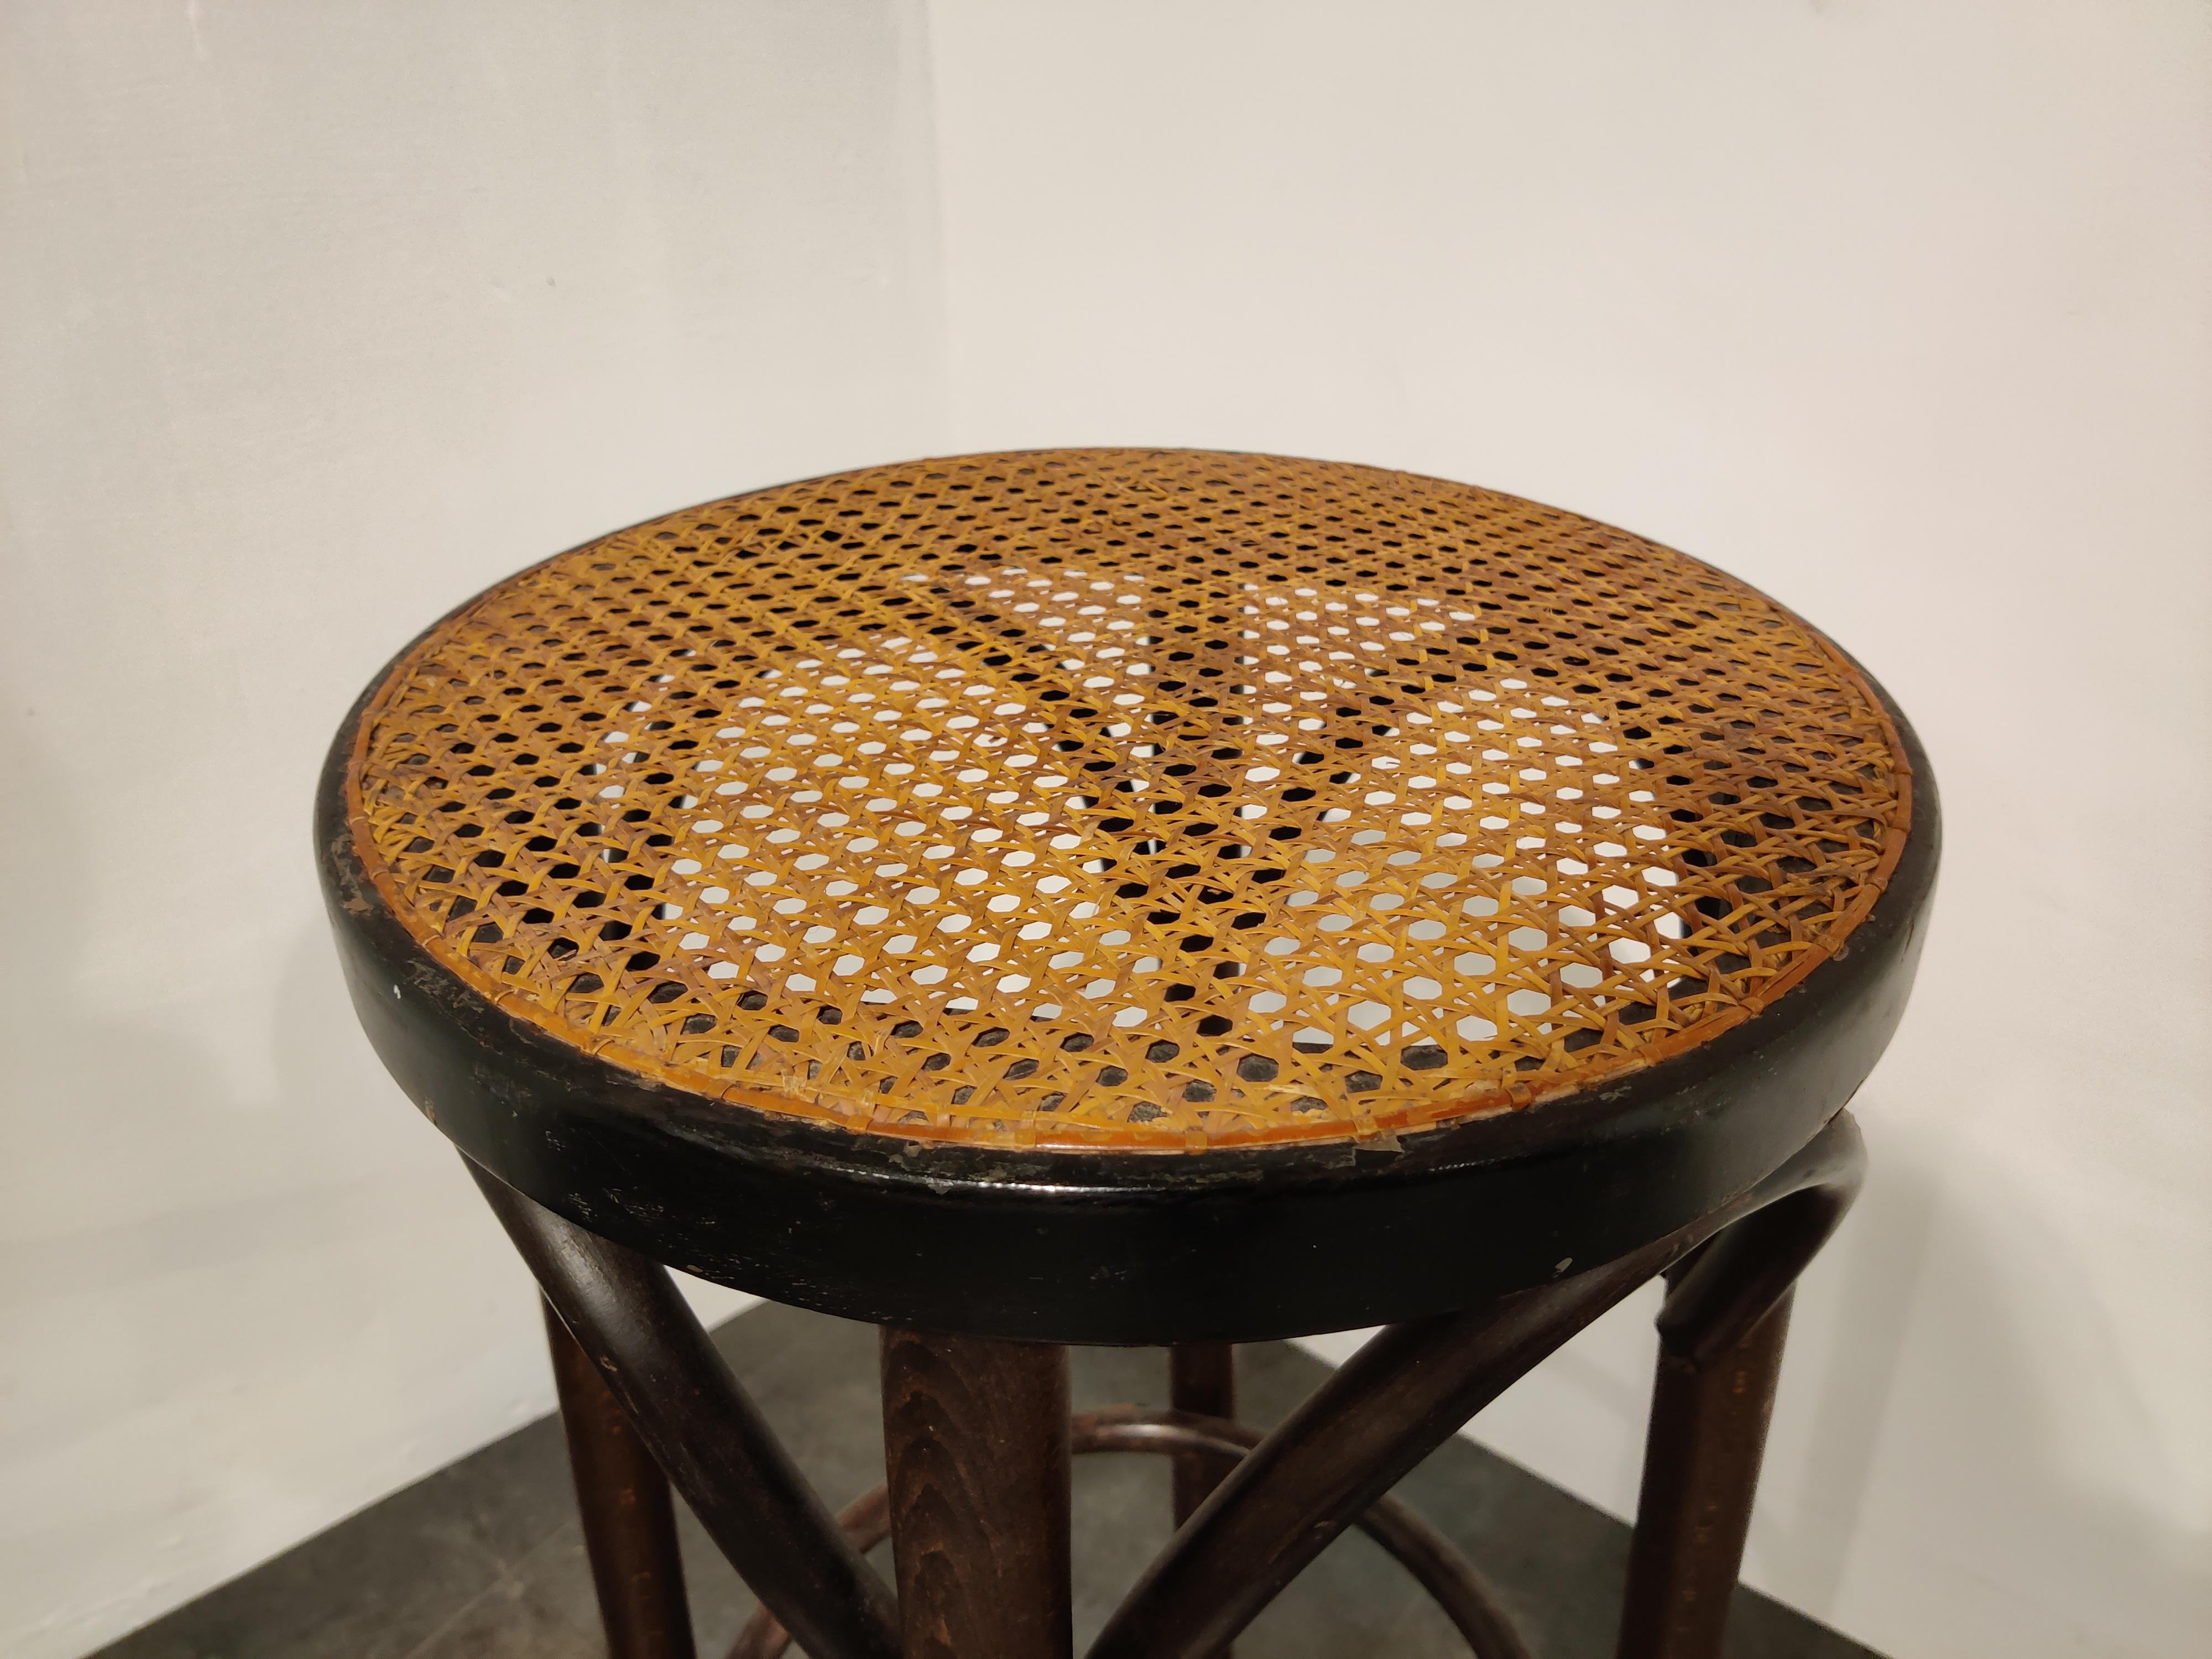 Vintage rattan and bentwood Thonet style stool.

Good condition.

1950s, Romania

Good condition

Dimensions:
Height 75cm/29.52